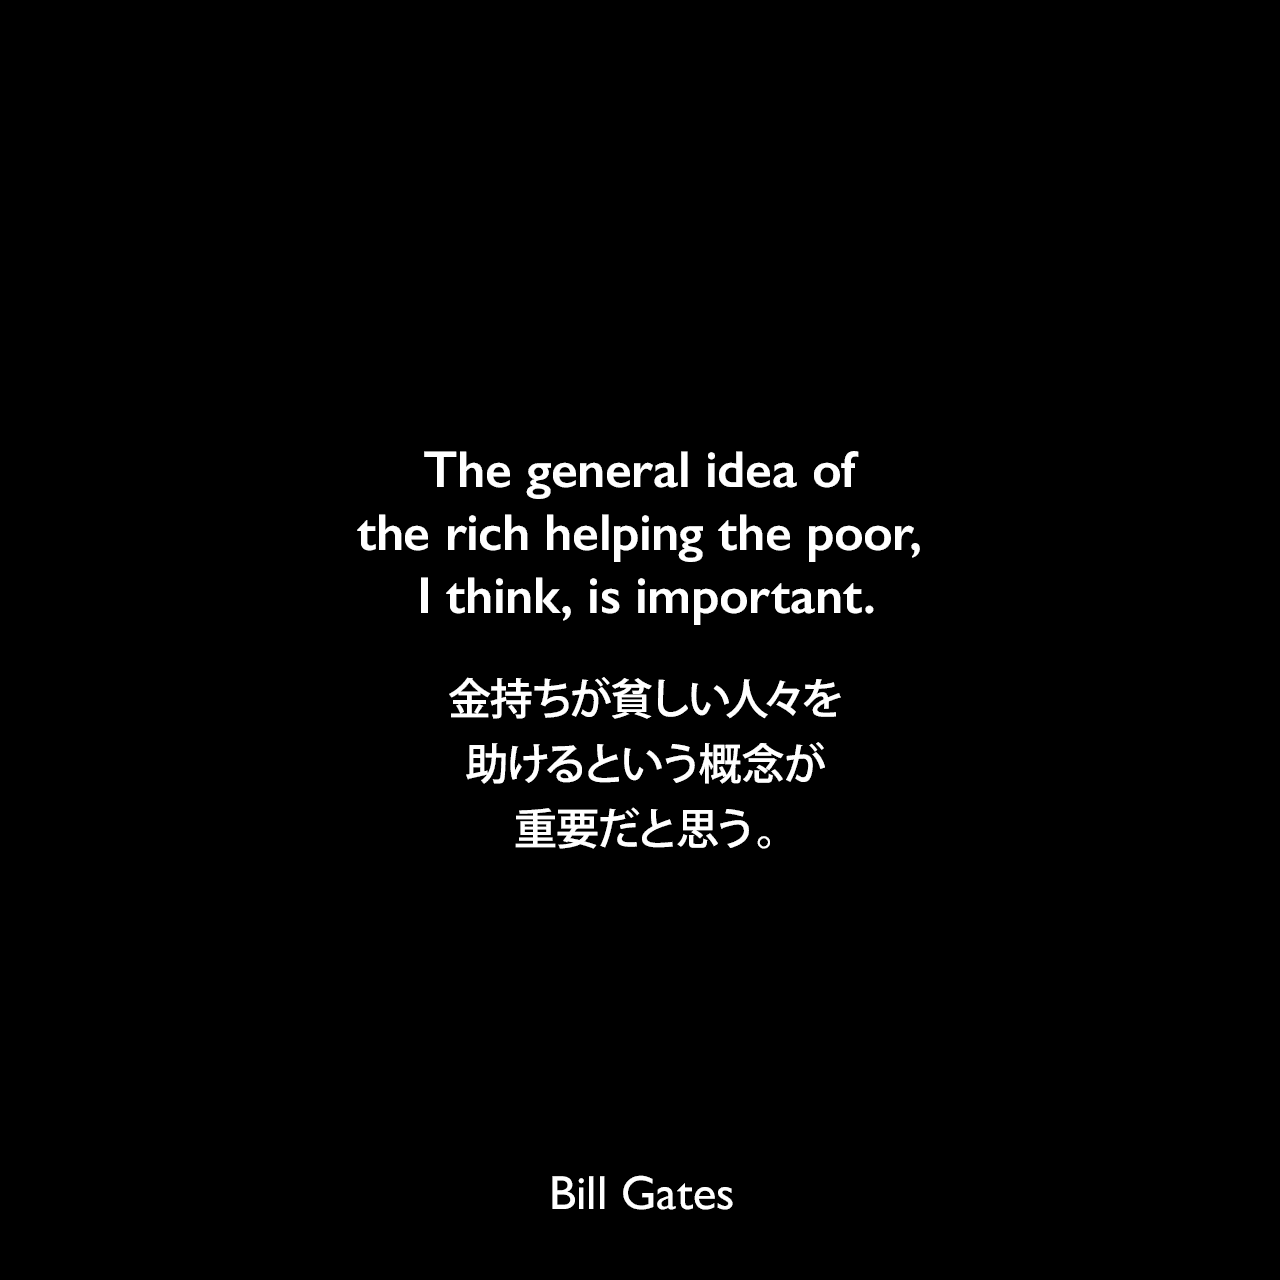 The general idea of the rich helping the poor, I think, is important.金持ちが貧しい人々を助けるという概念が重要だと思う。Bill Gates